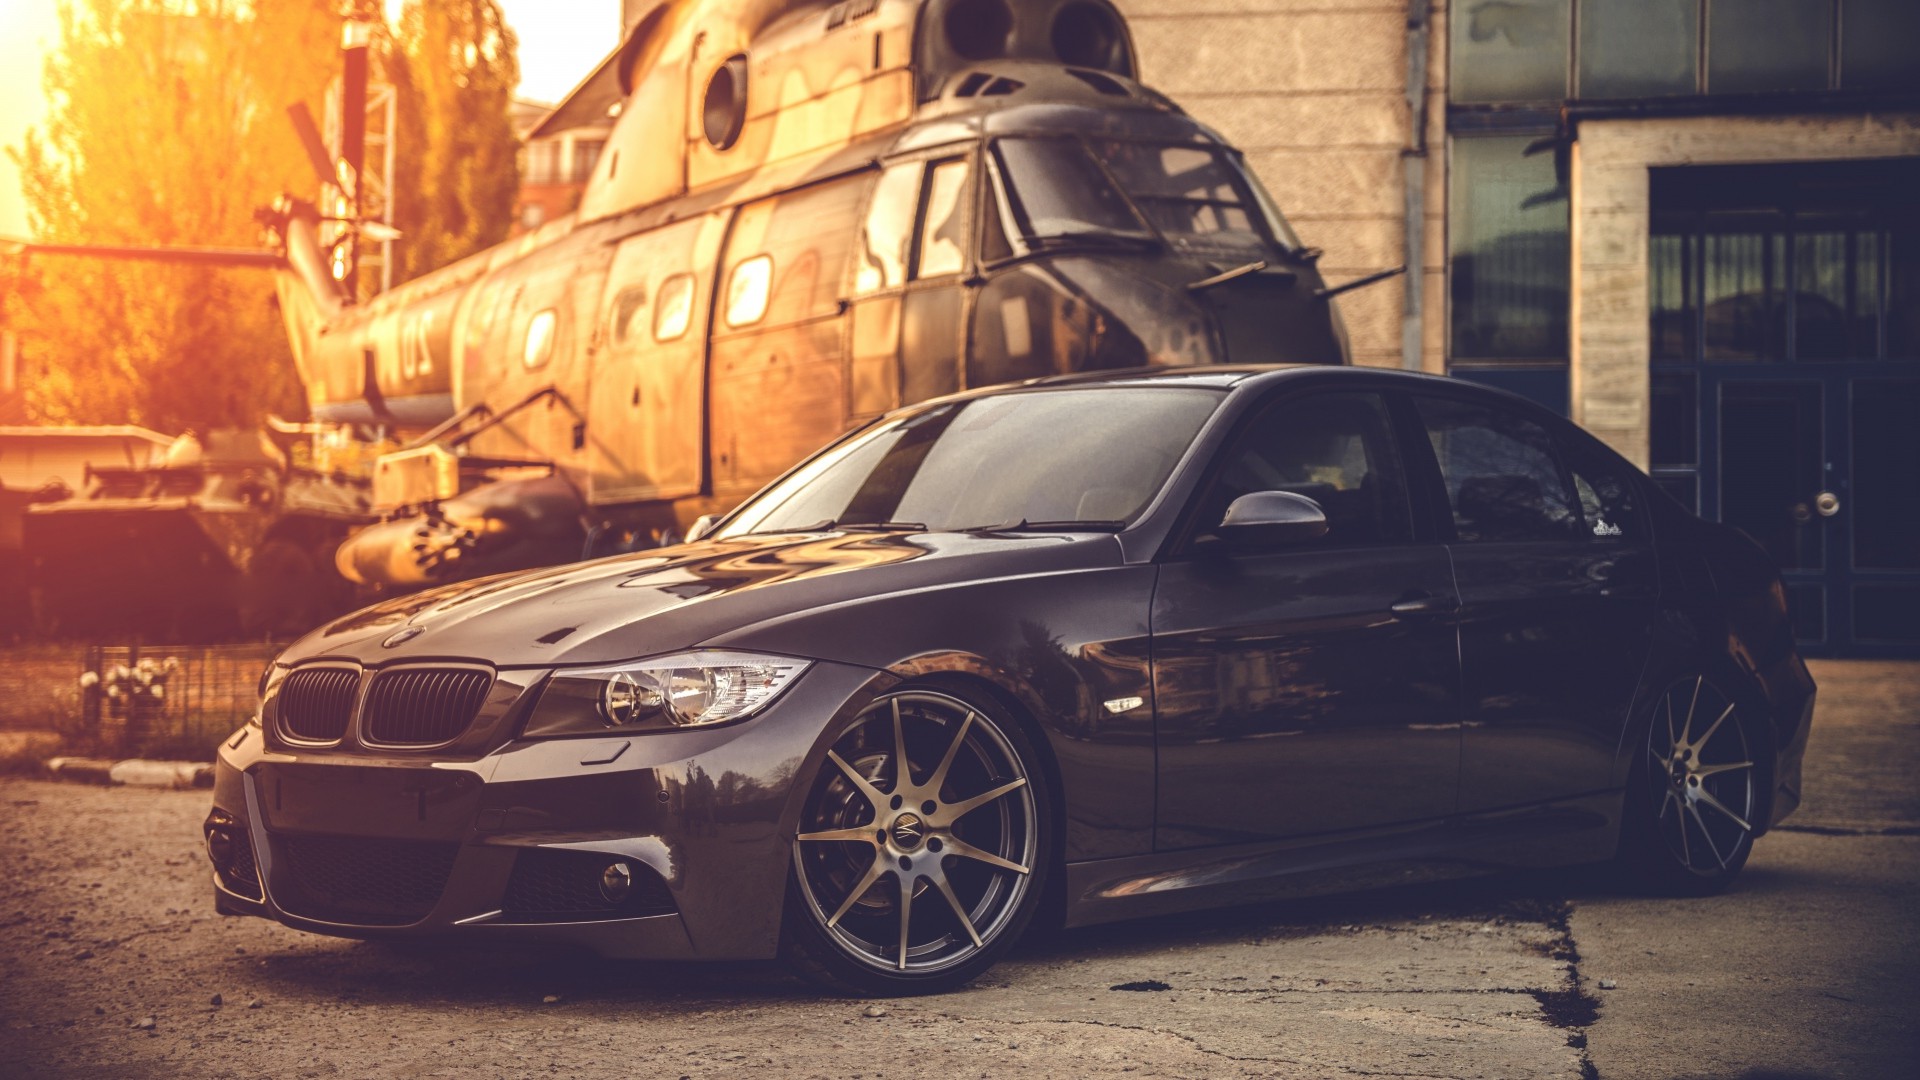 BMW E90, Car, Helicopters, Black, Military, BMW Wallpaper